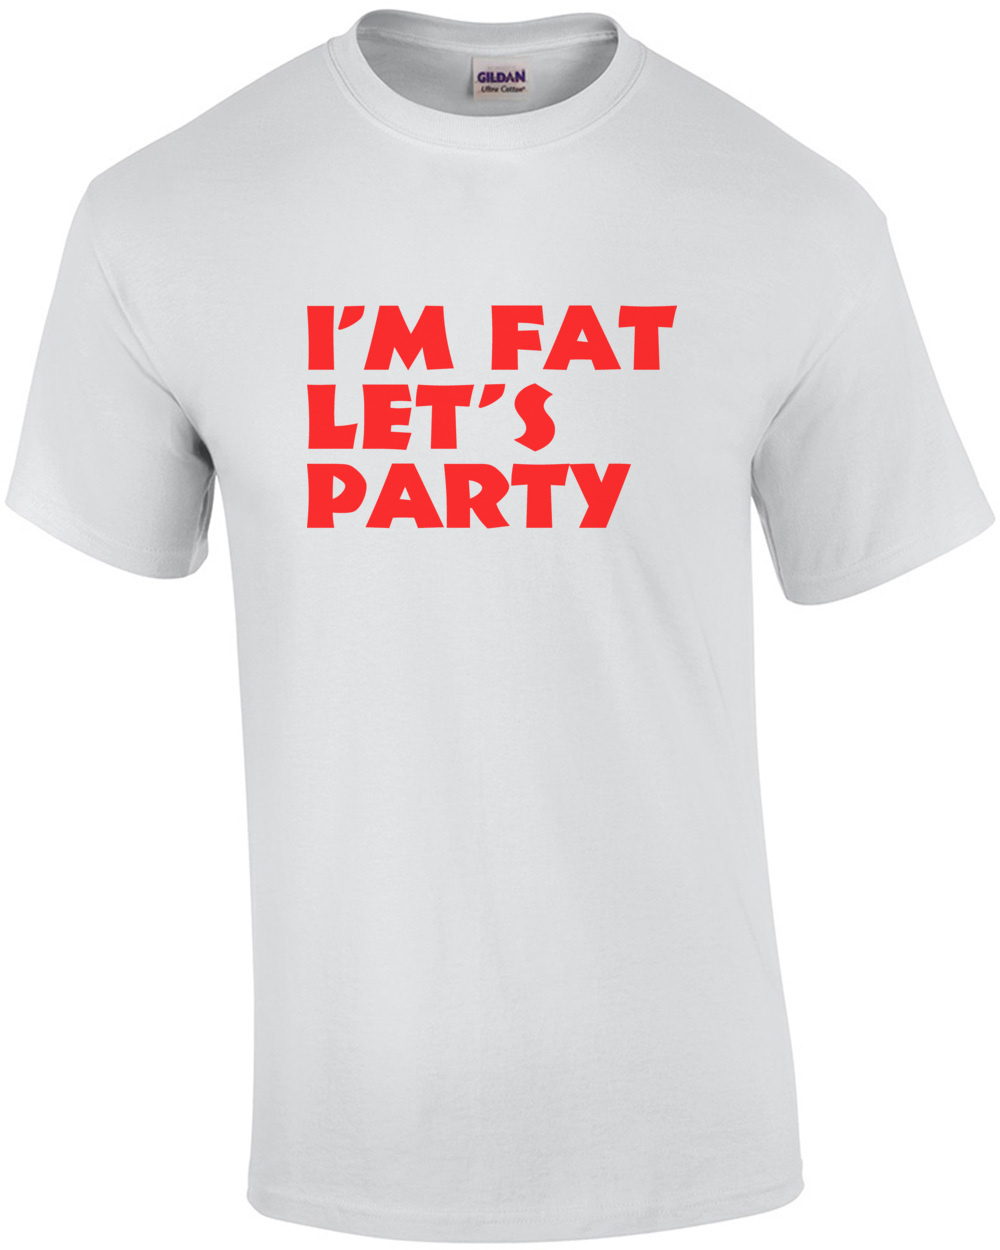 I'm Fat, Let's Party Funny Shirt | eBay